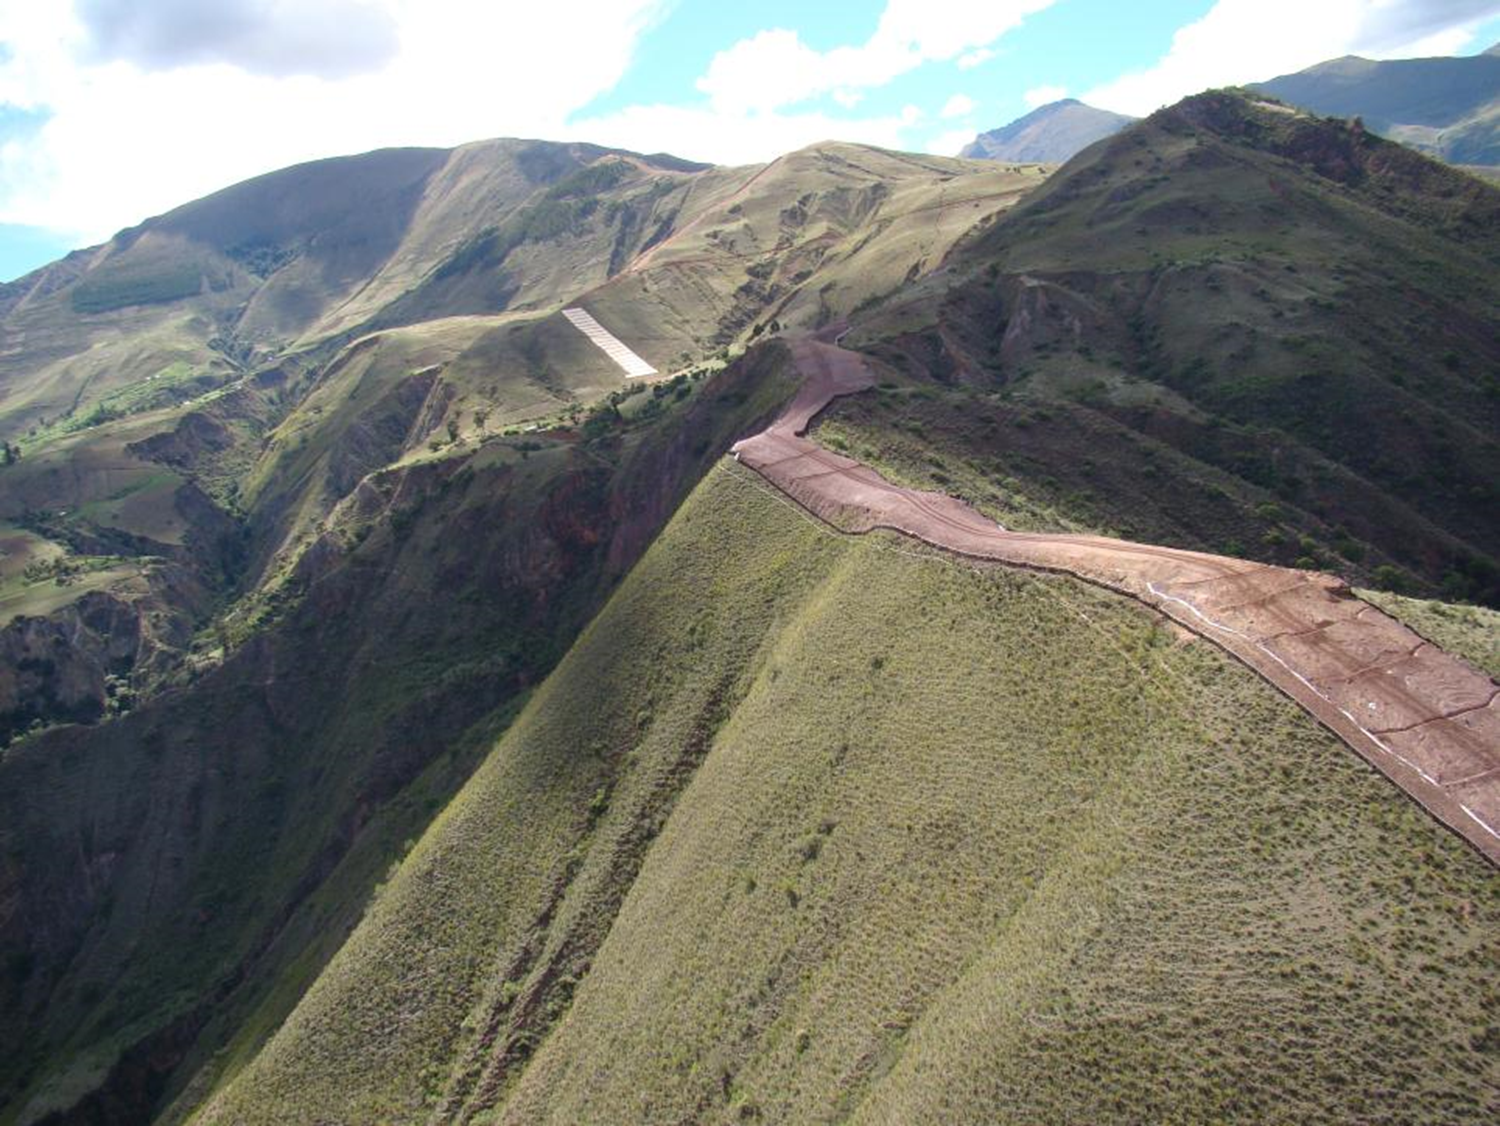 A road for pipeline development (right-of-way) on a steep ridgeline in the Andean mountains